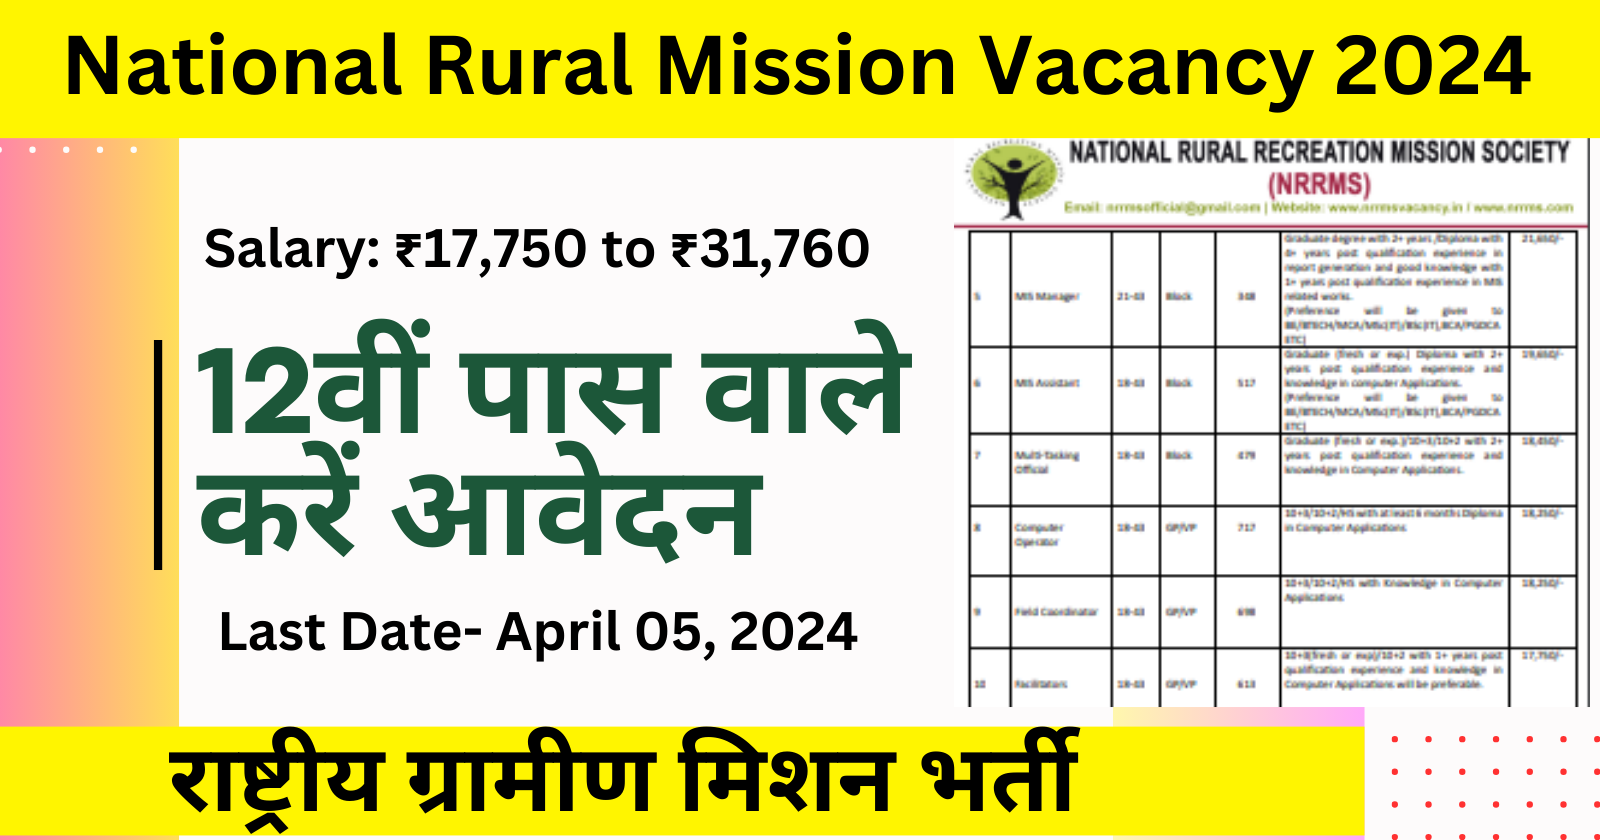 National Rural Mission Vacancy 2024